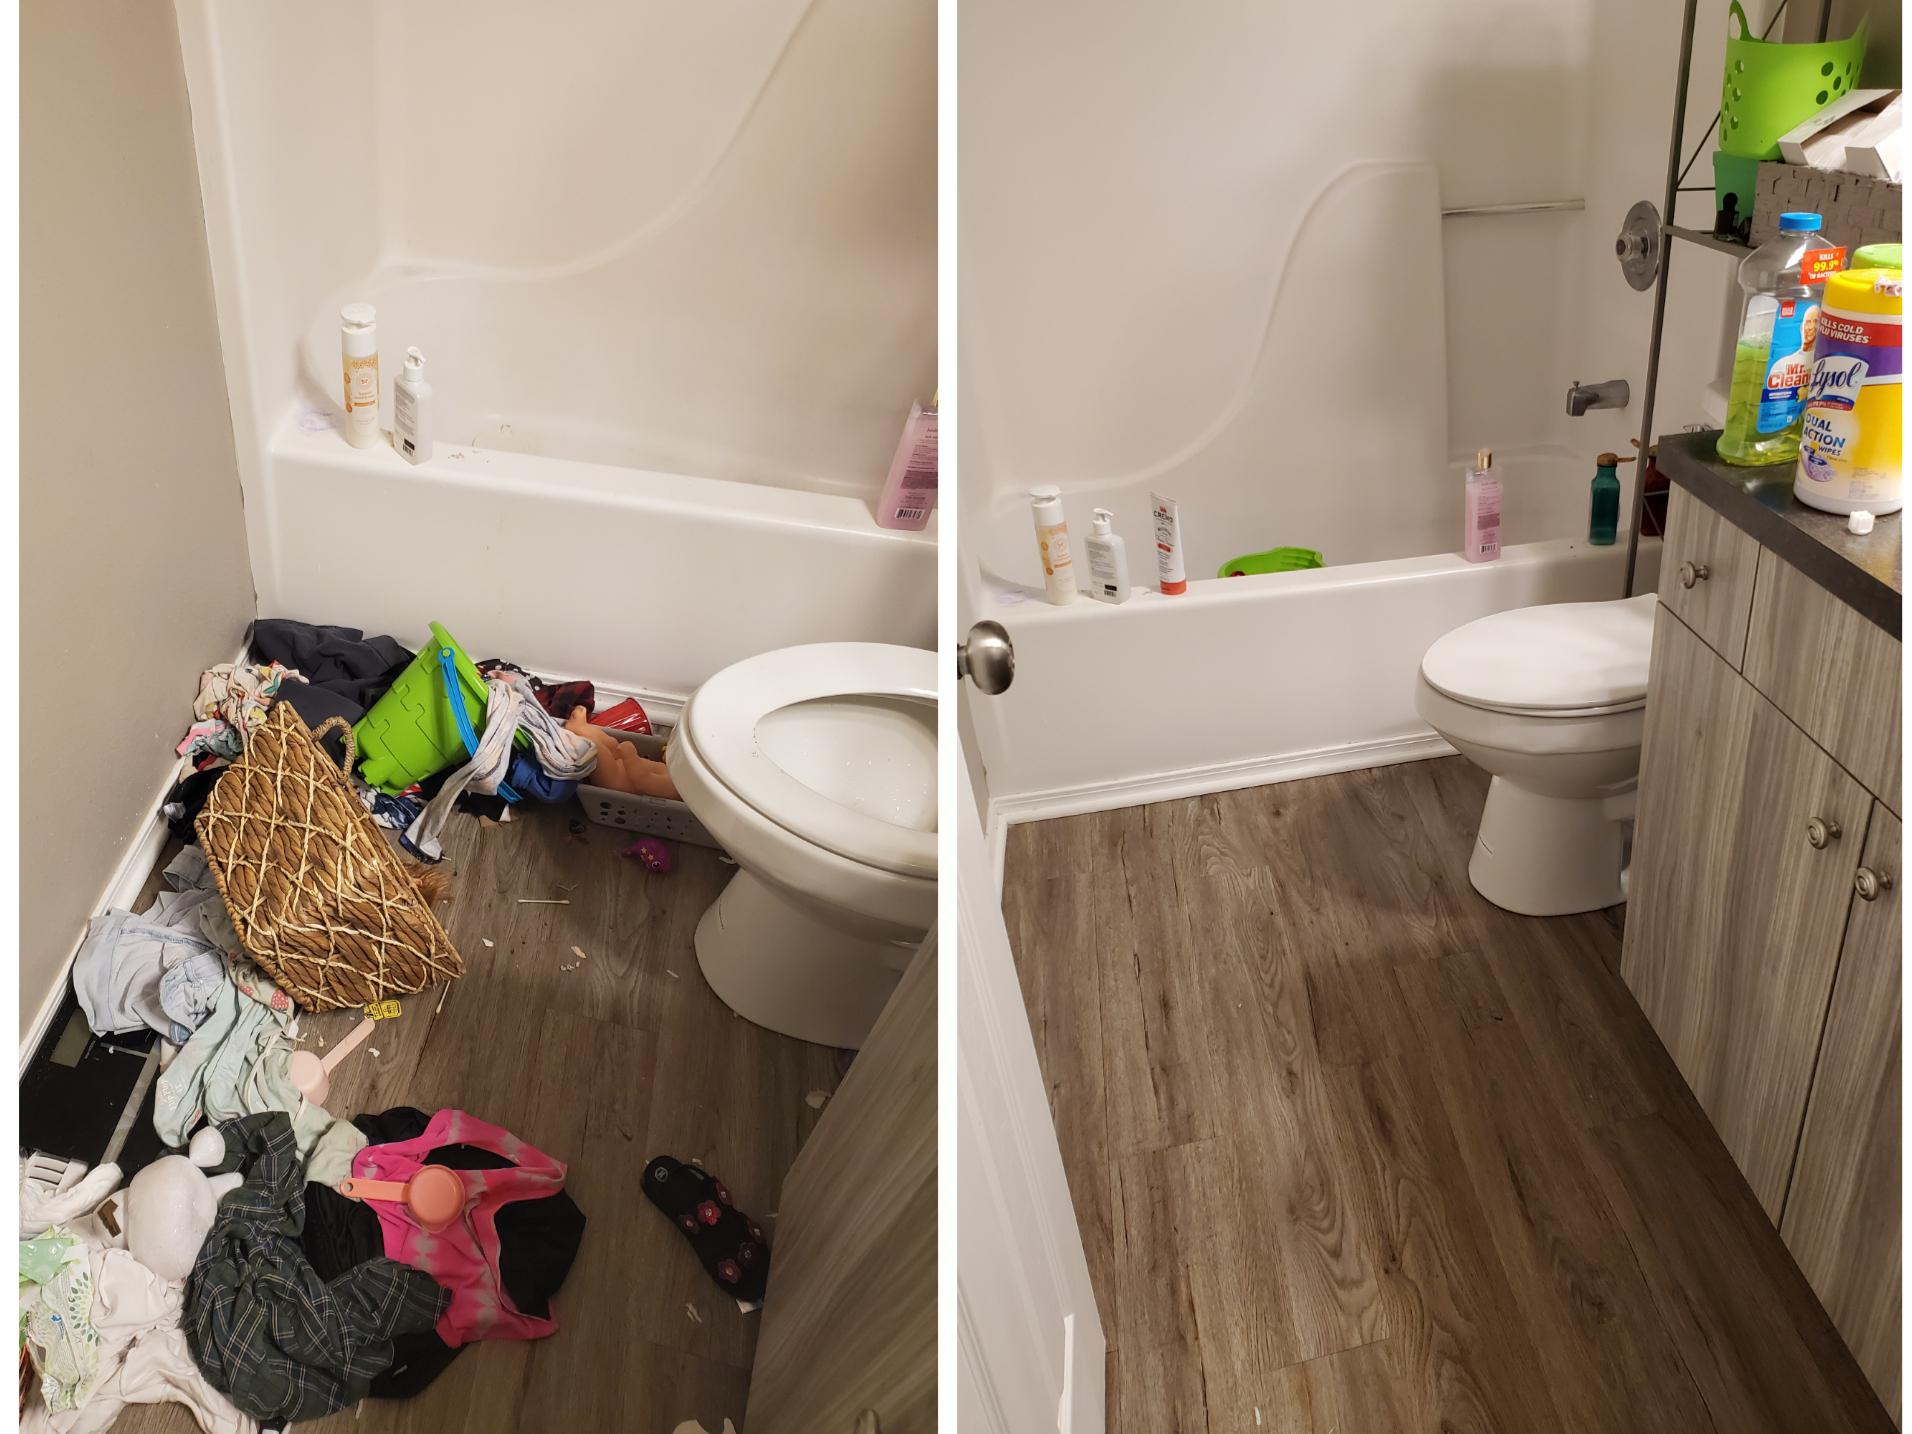 before and after of dirty and cluttered bathroom that has been cleaned up.